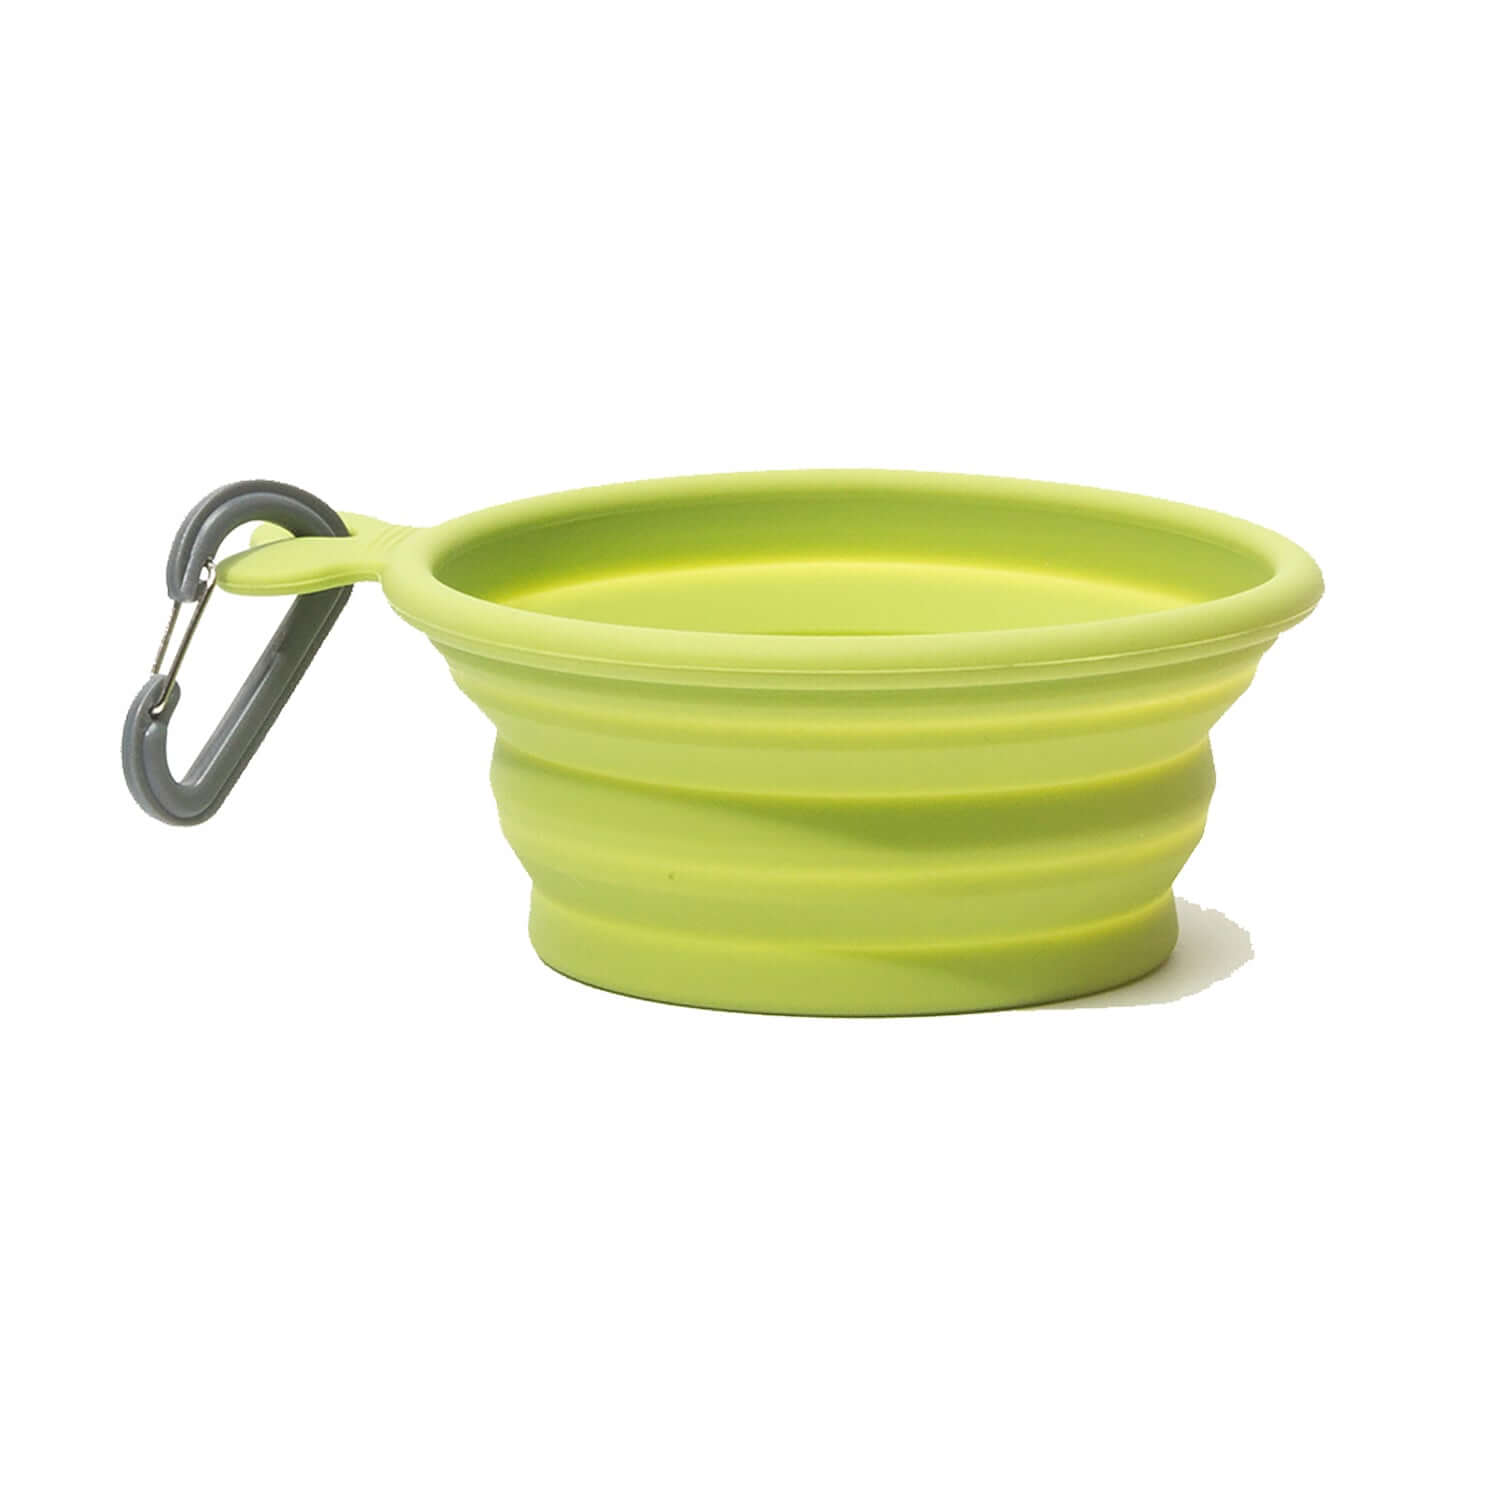 Green Collapsible silicone dog travel bowl with carabiner, 3  cup capacity.